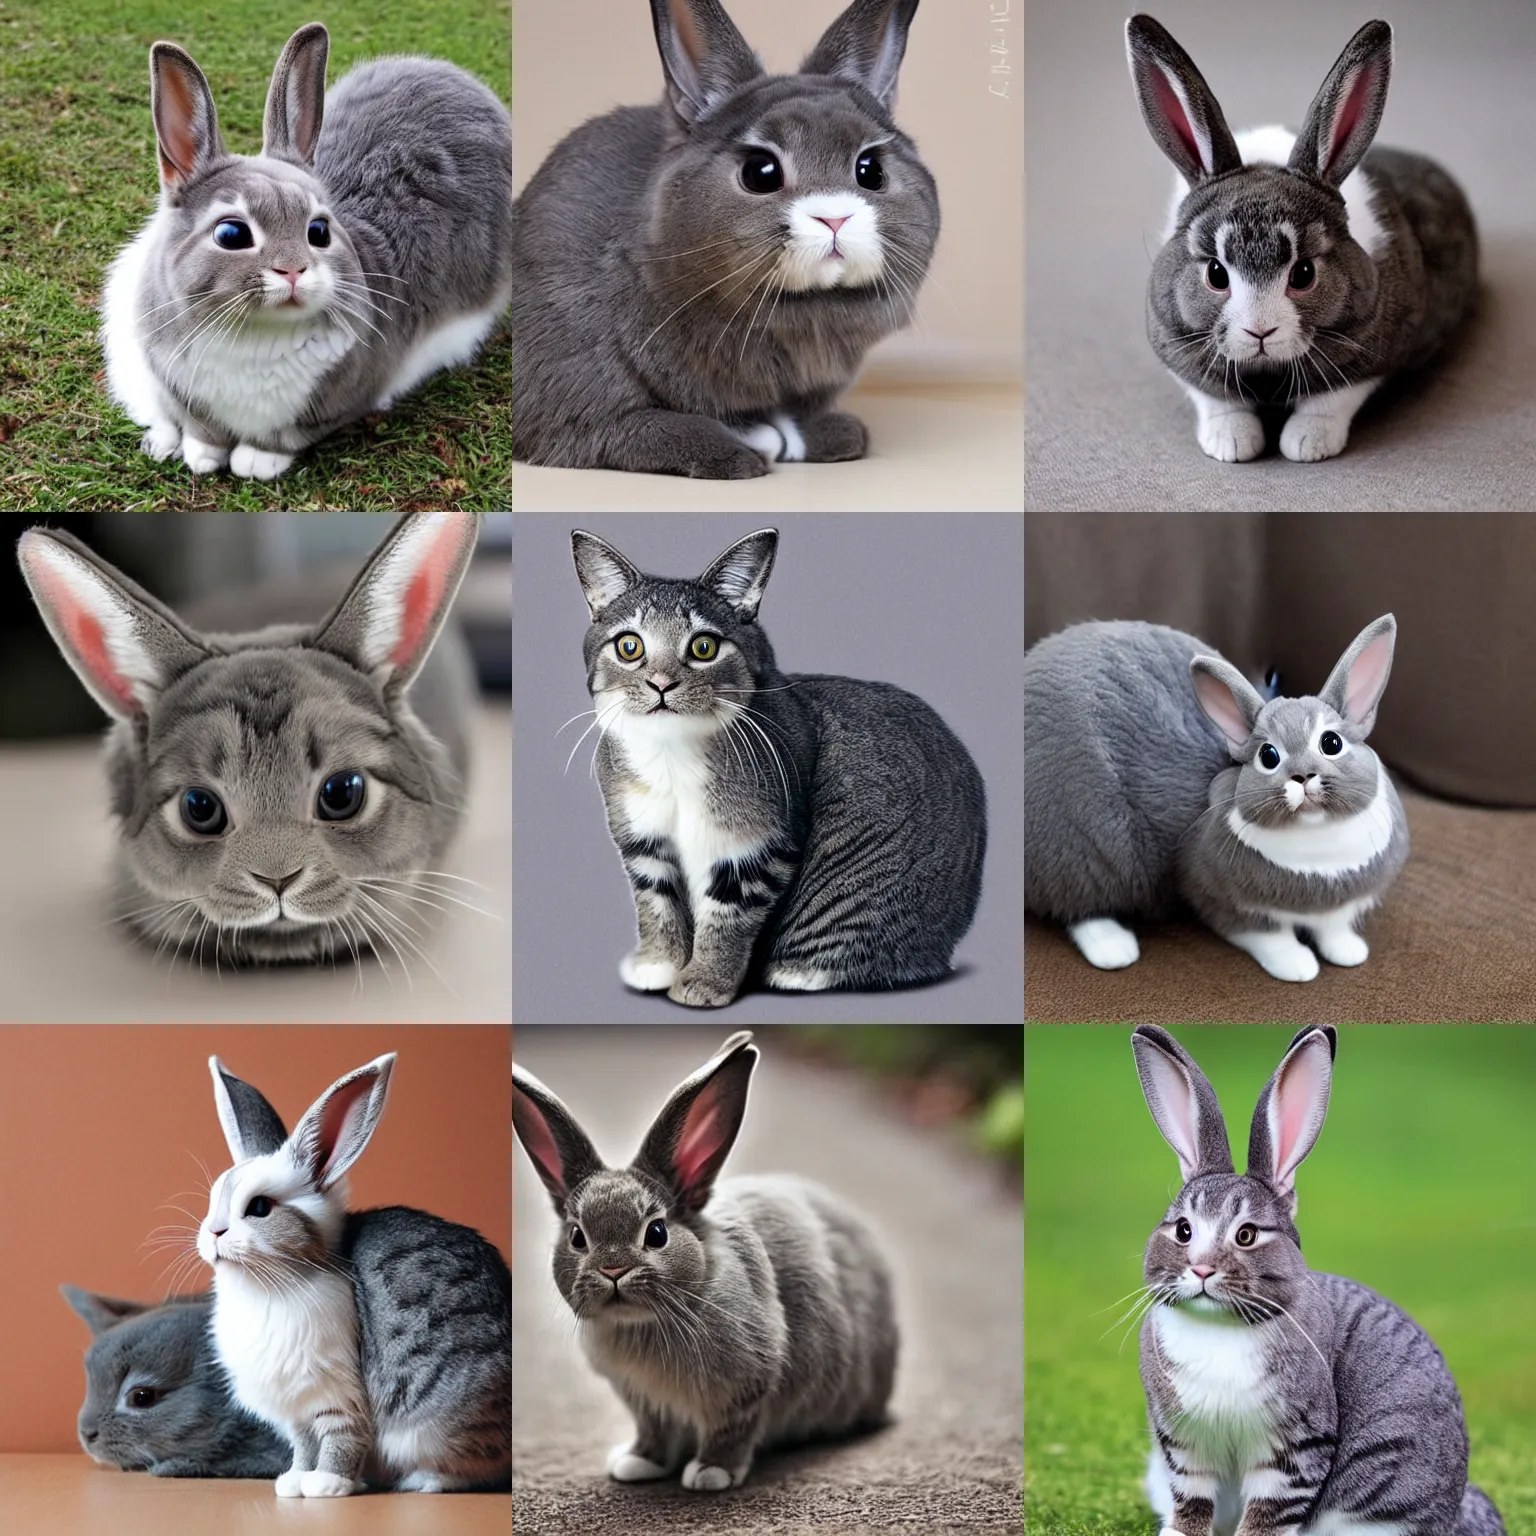 Prompt: a bunny cat - a cat combined / merged with a rabbit, grey